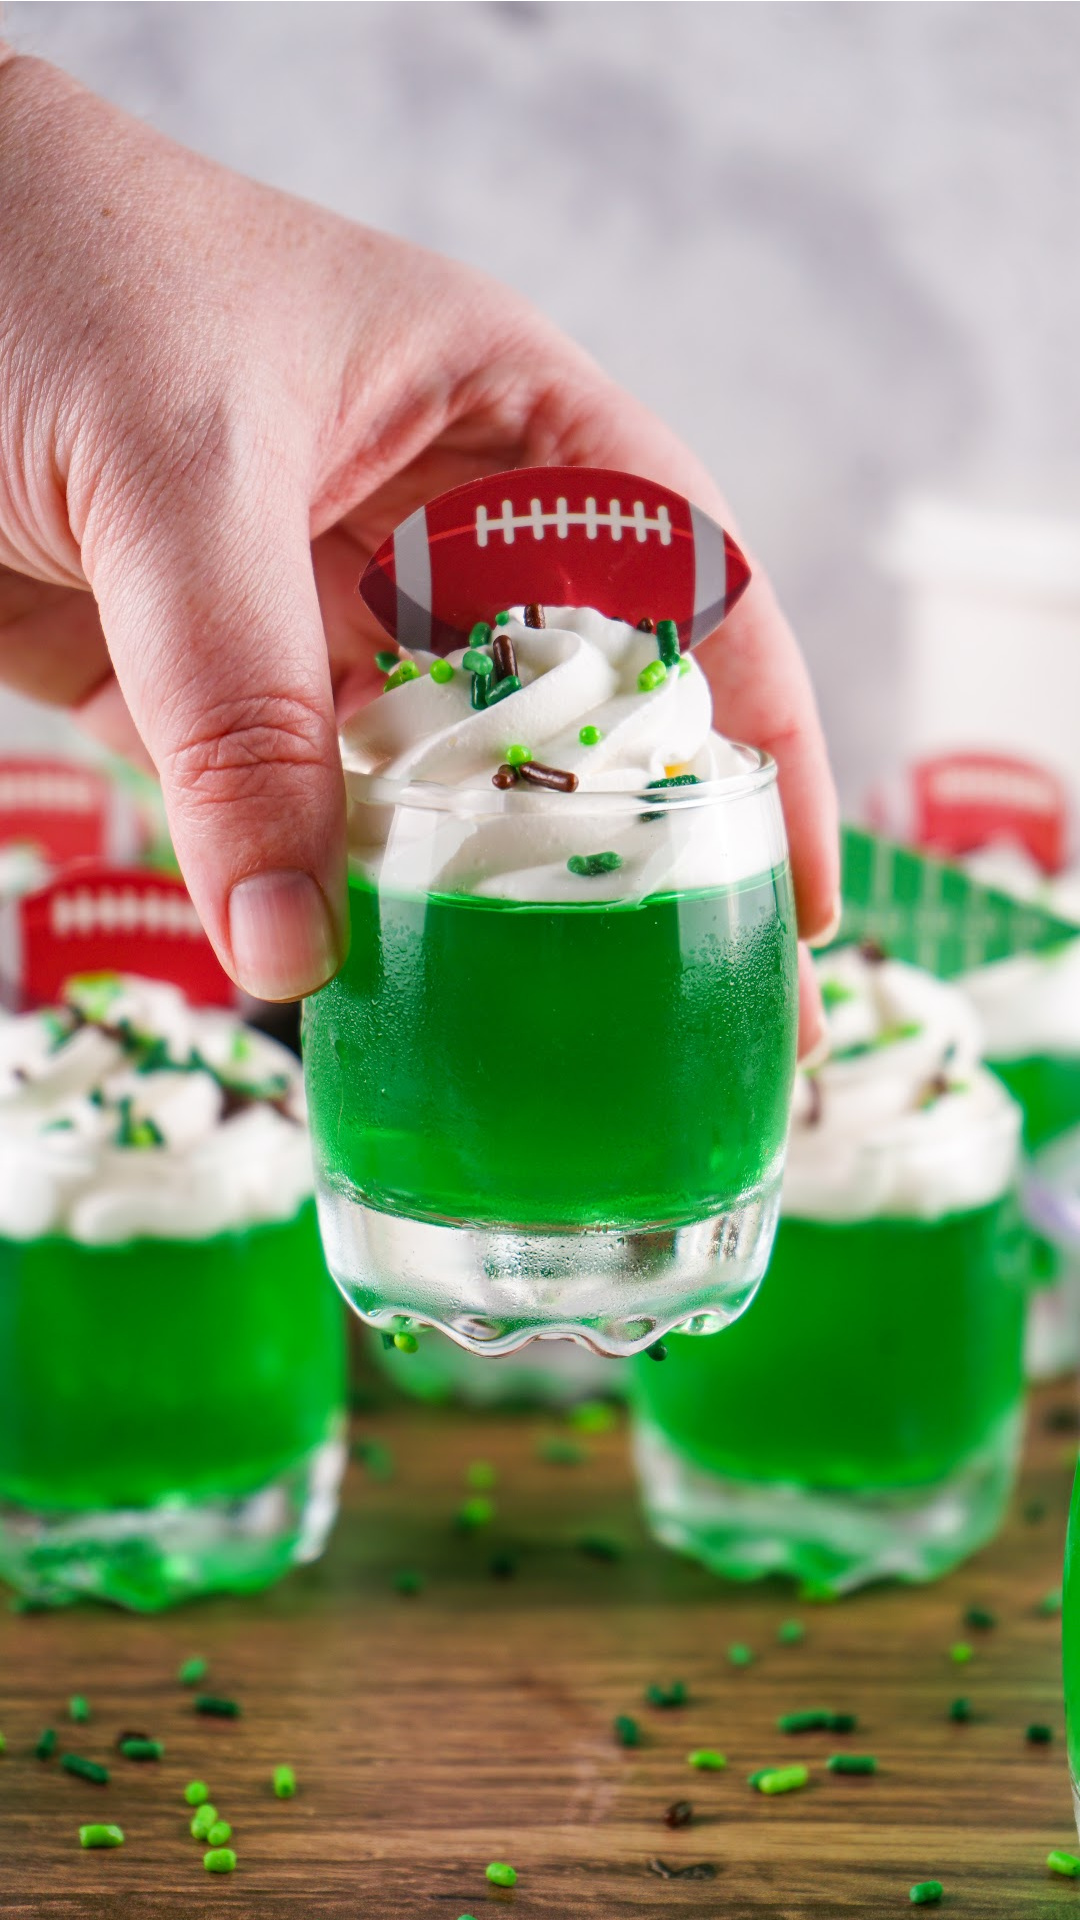 A hand holding a Green jello shots topped with whipped cream with brown and green sprinkles and football toppers. The perfect game day football jello shots!